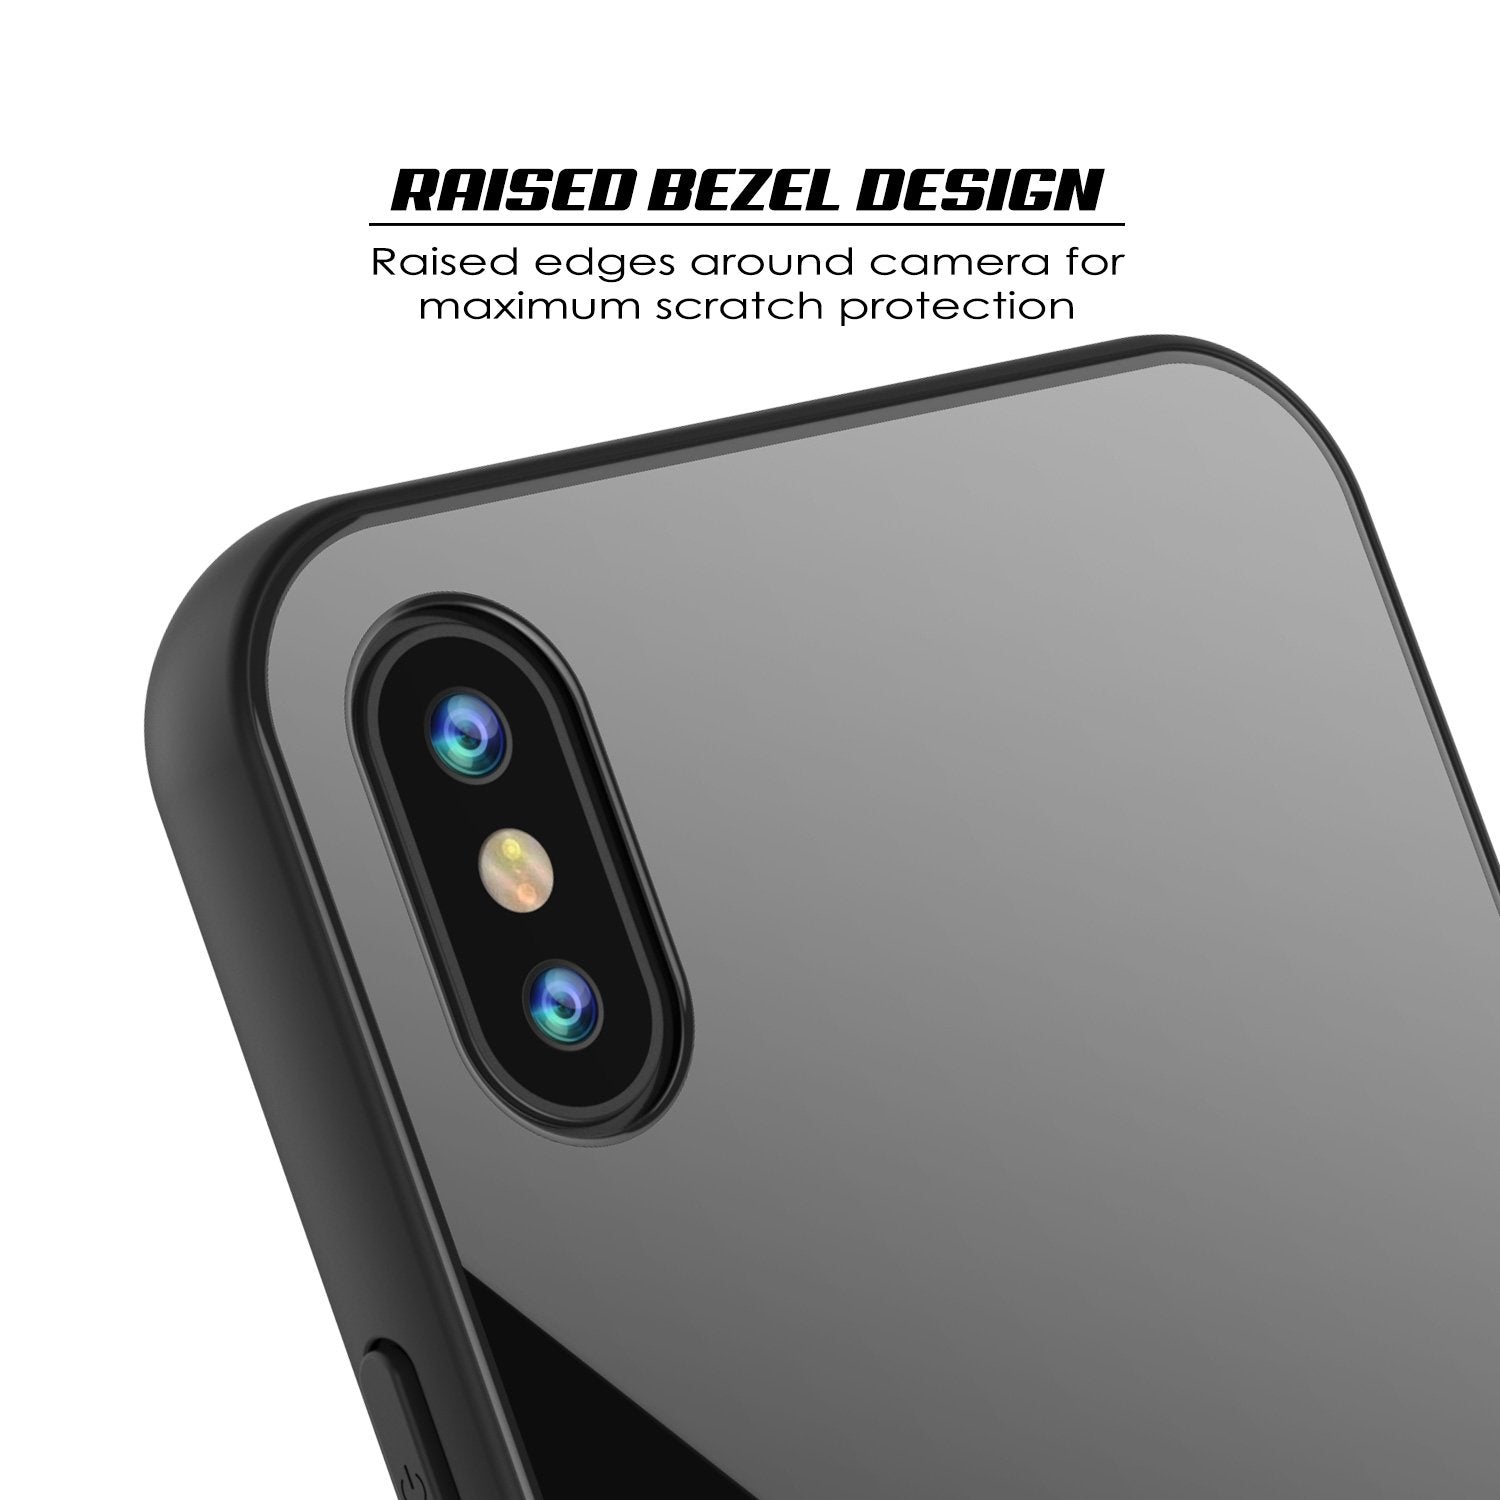 iPhone X Case, Punkcase GlassShield Ultra Thin Protectiv Cover, Black